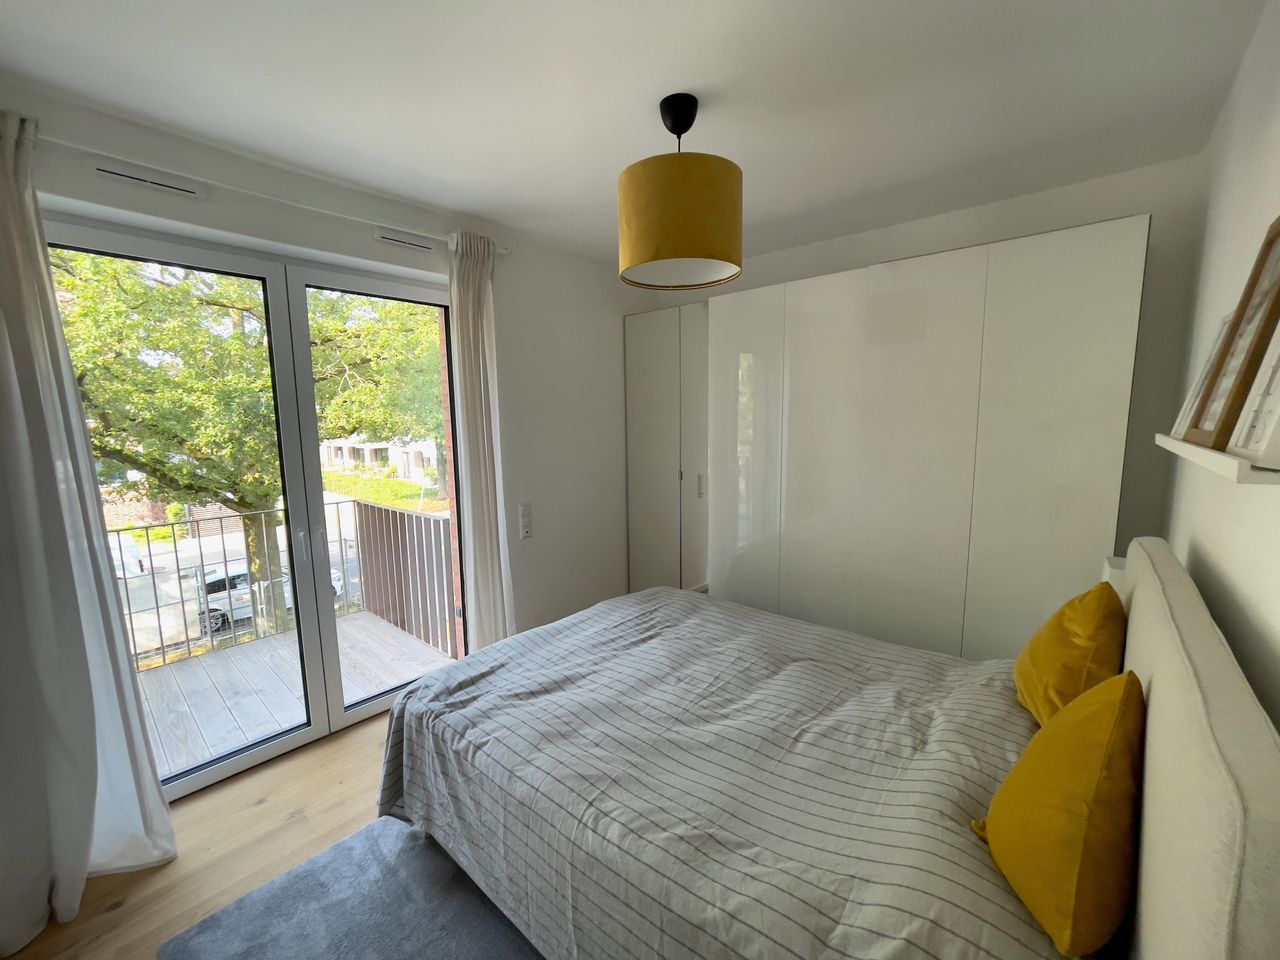 New, bright & modern 1-room apartment with balcony & private parking space in Hanover, near MHH